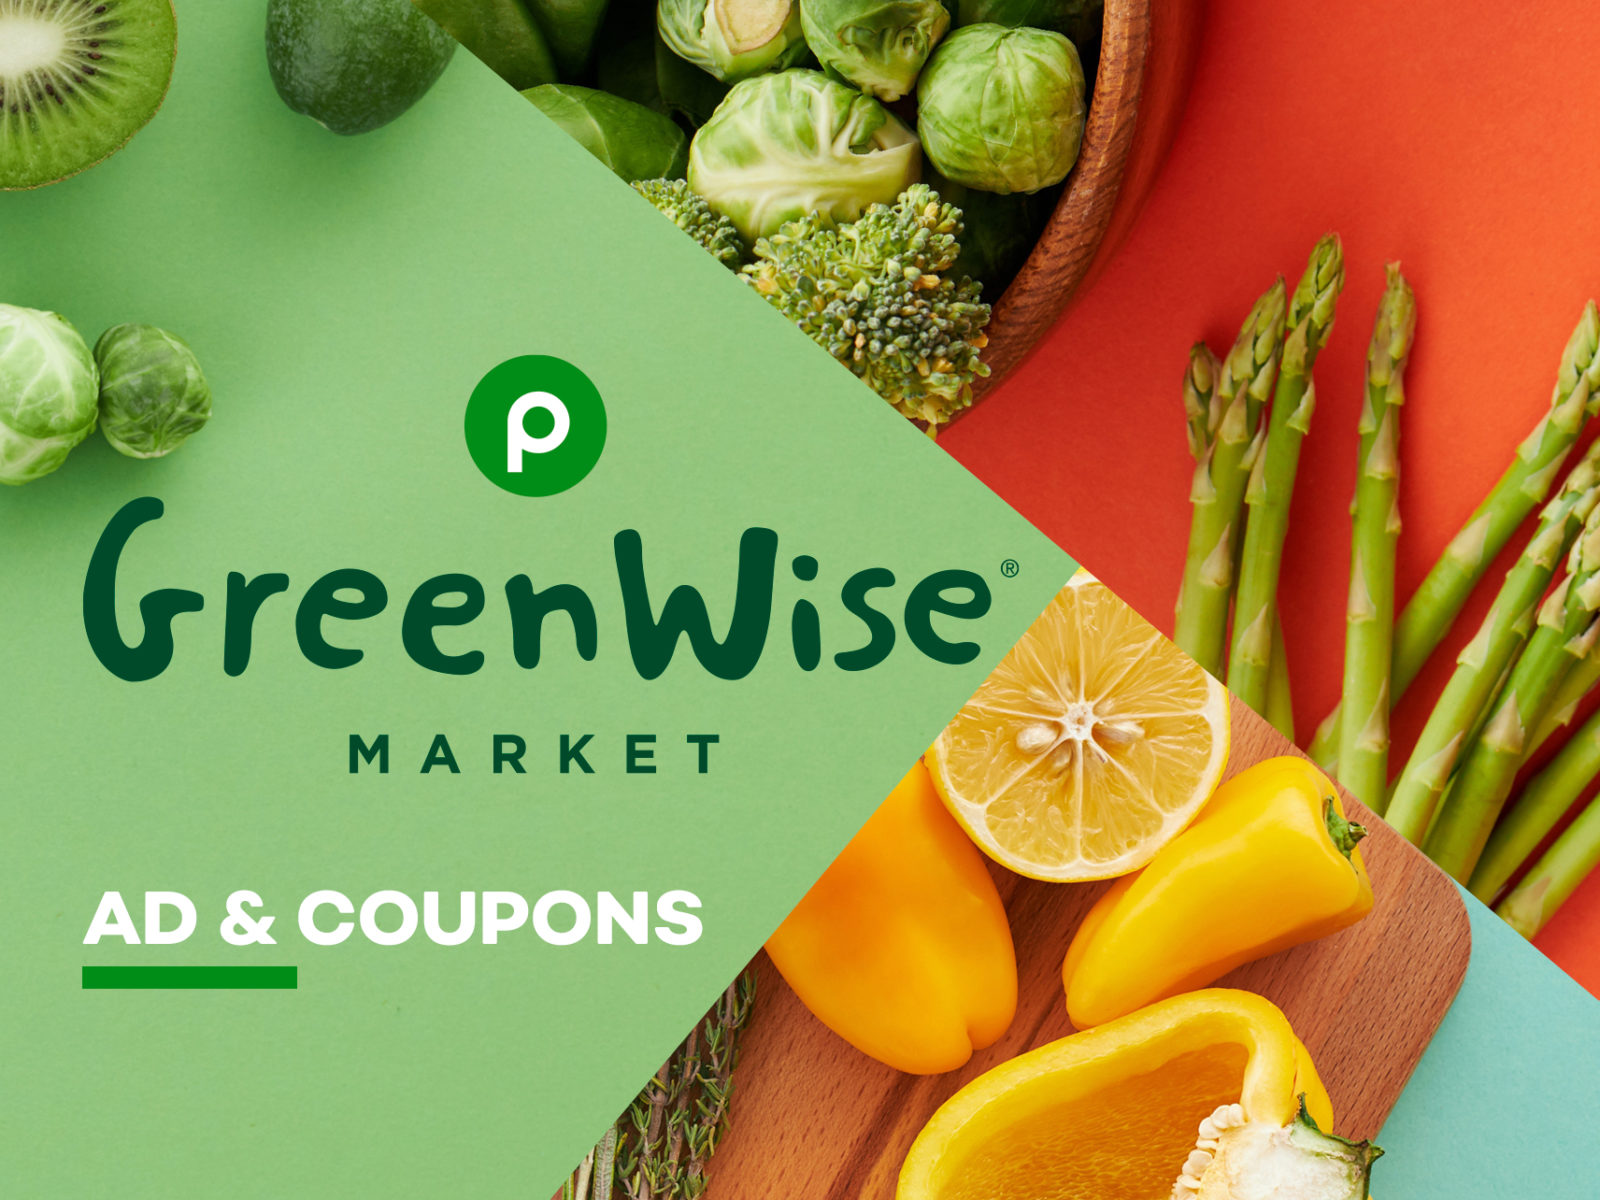 Publix GreenWise Market Ad & Coupons Week Of 6/9 to 6/15 (6/8 to 6/14 For Some)